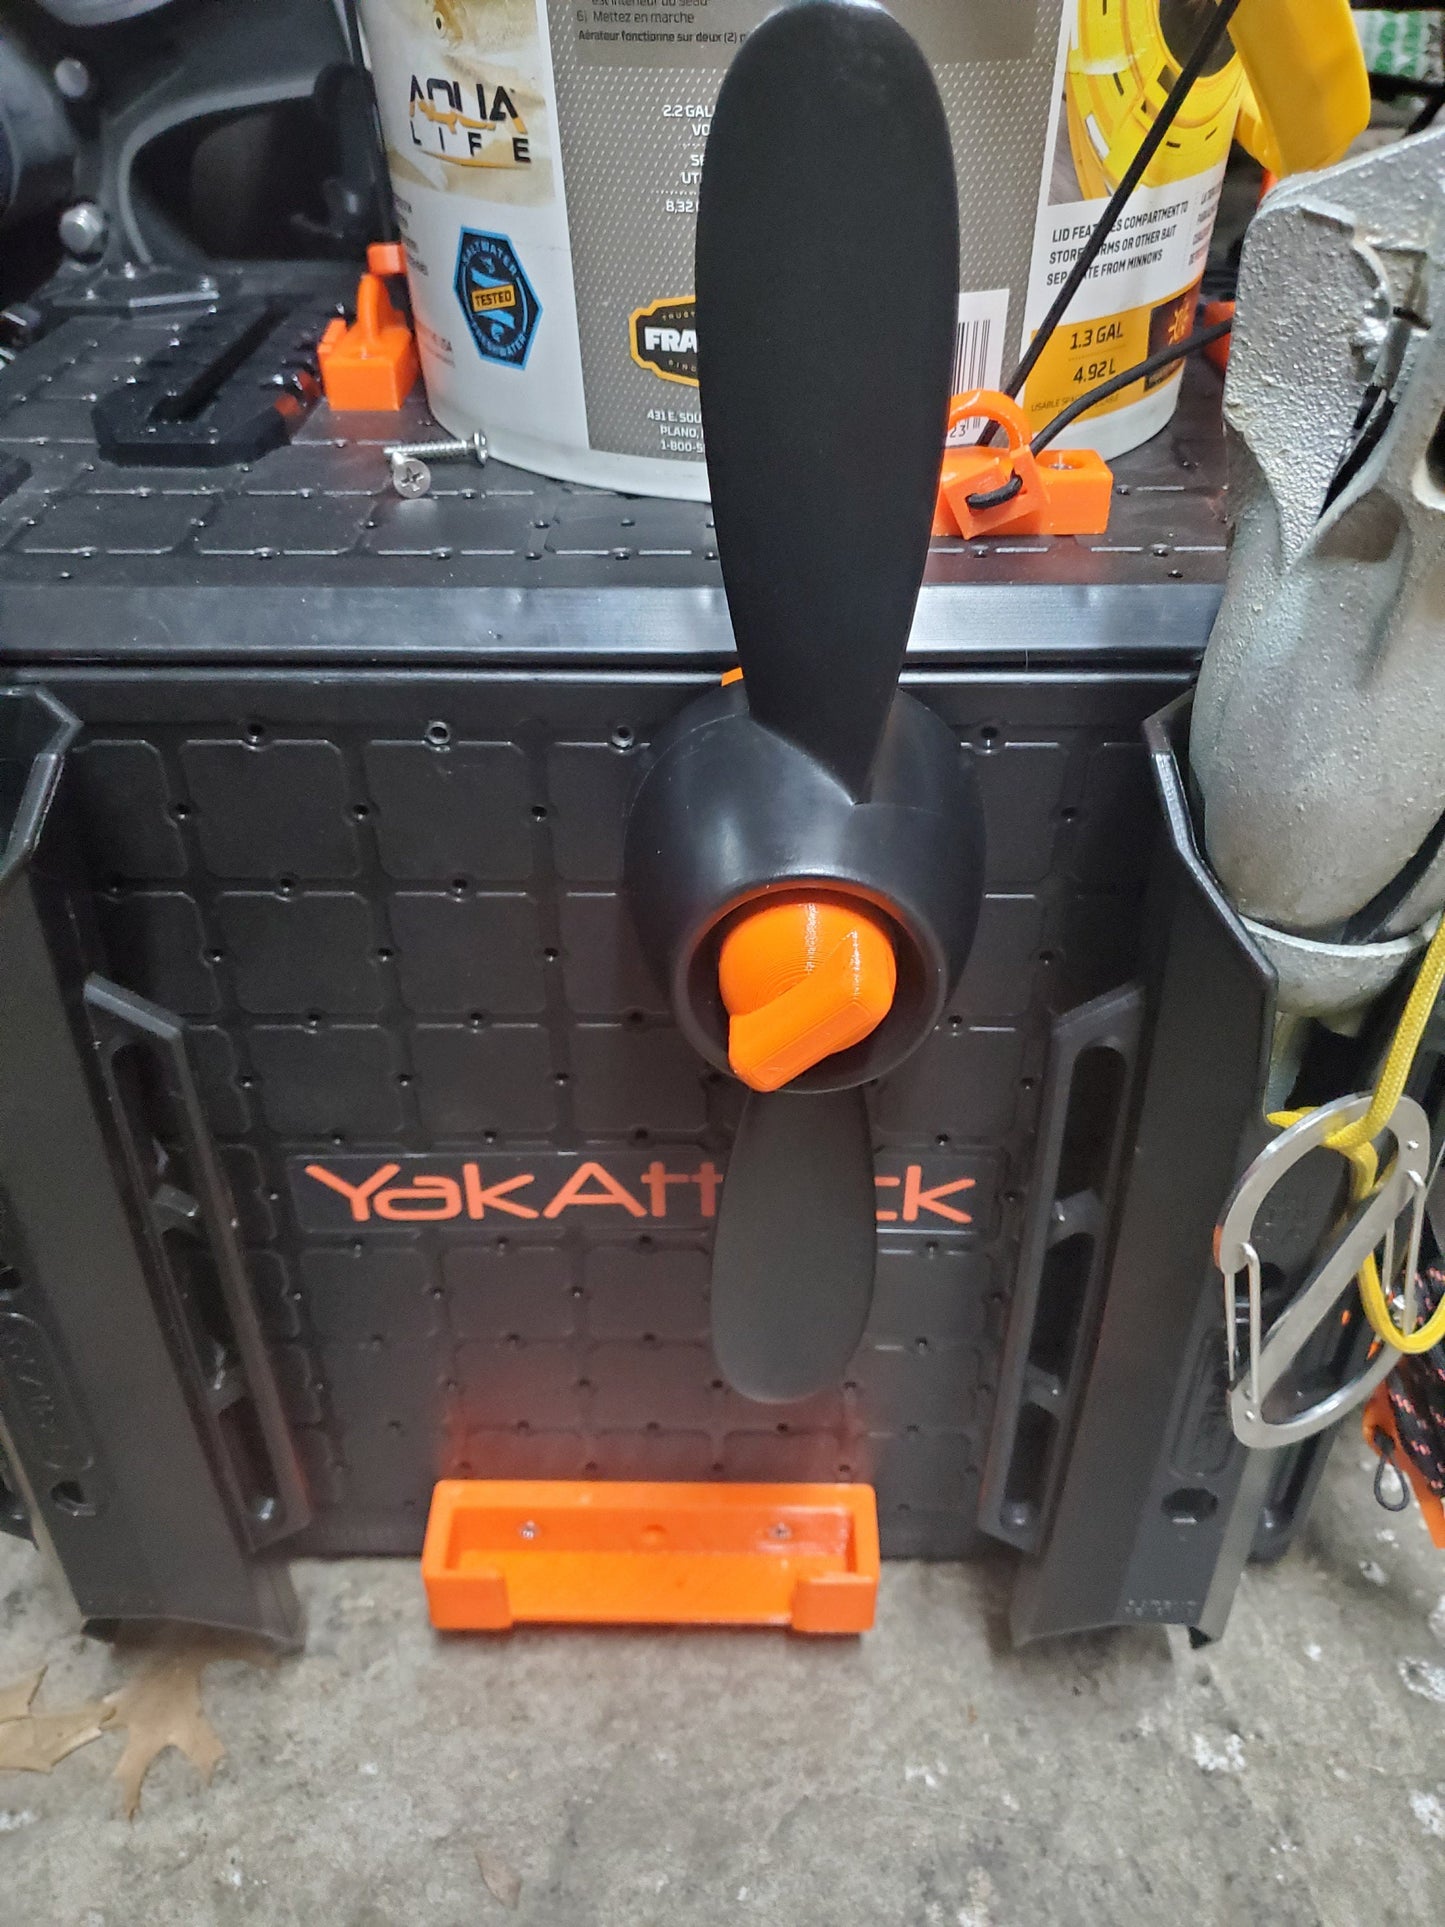 Photo of prop mounted to BlackPak crate